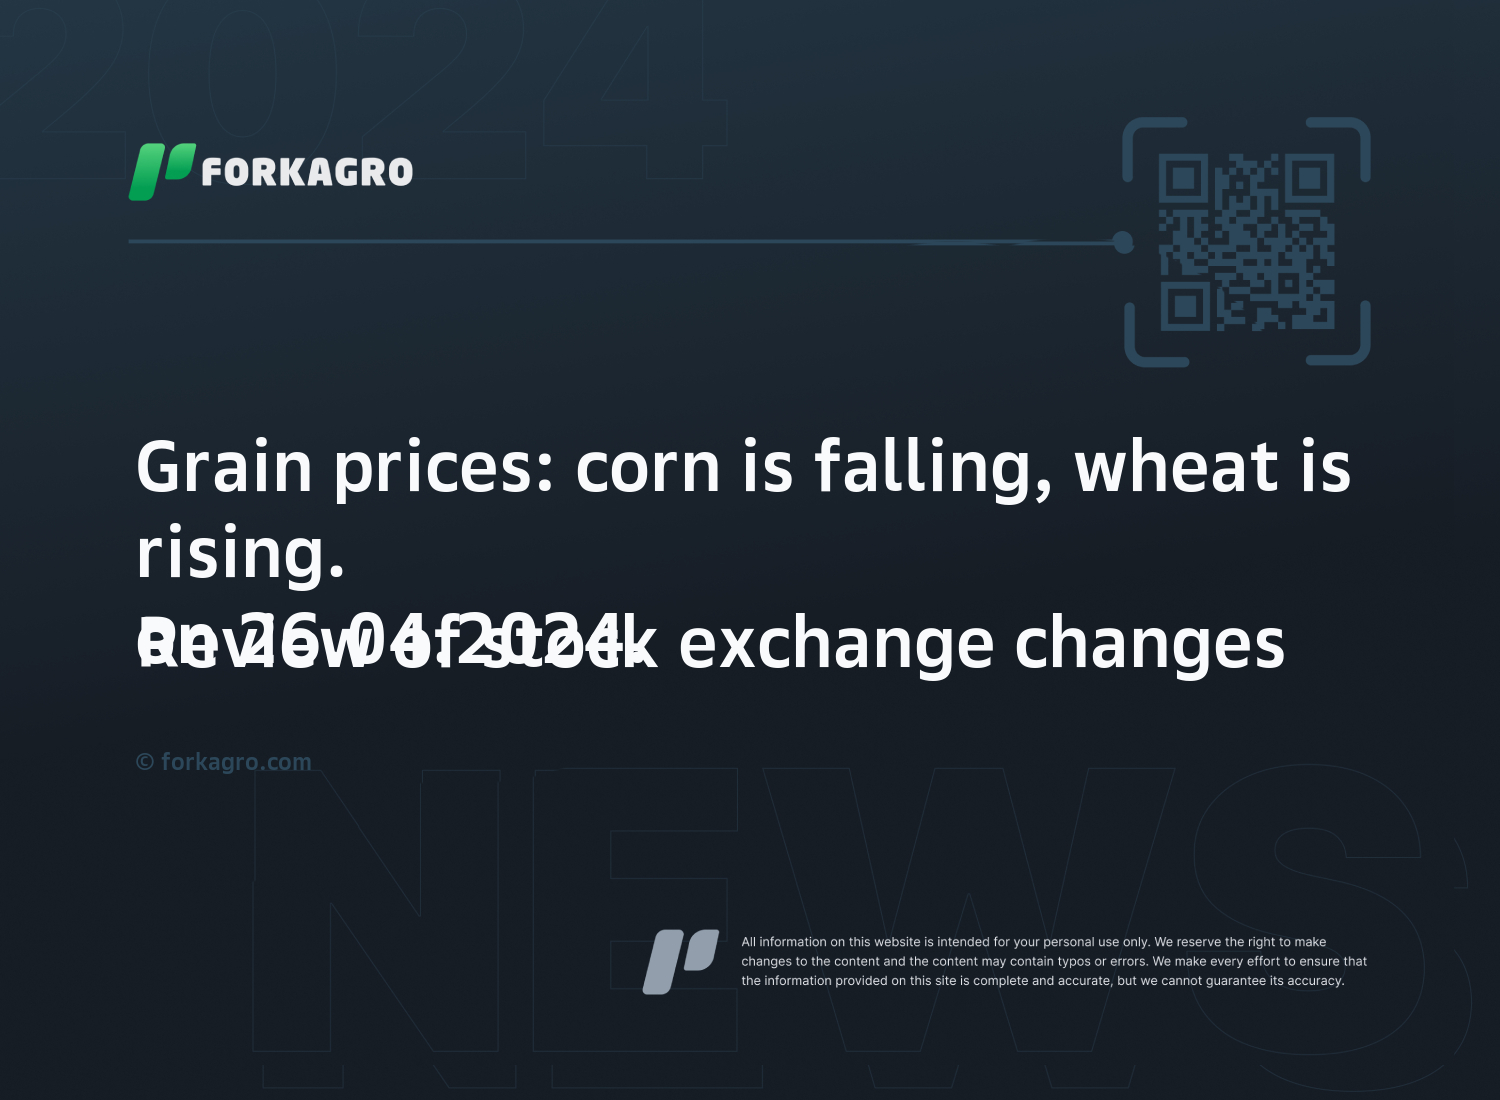 Grain prices: corn is falling, wheat is rising.
Review of stock exchange changes on 26.04.2024.